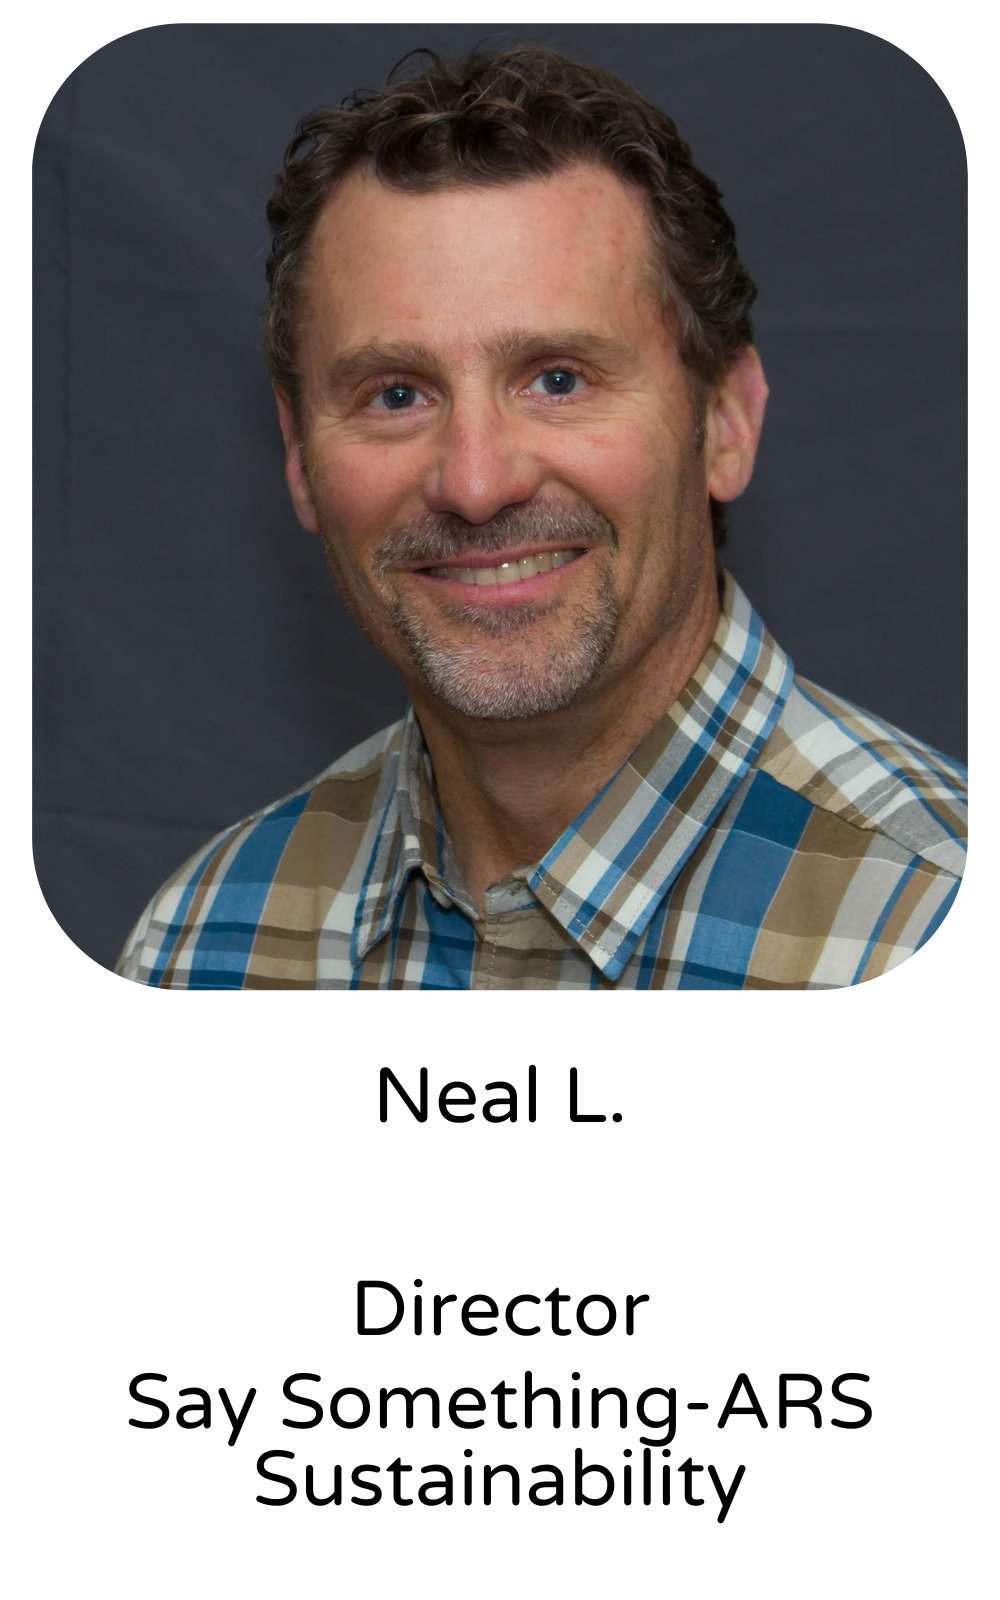 Neal L., Director, Say Something-ARS Sustainability